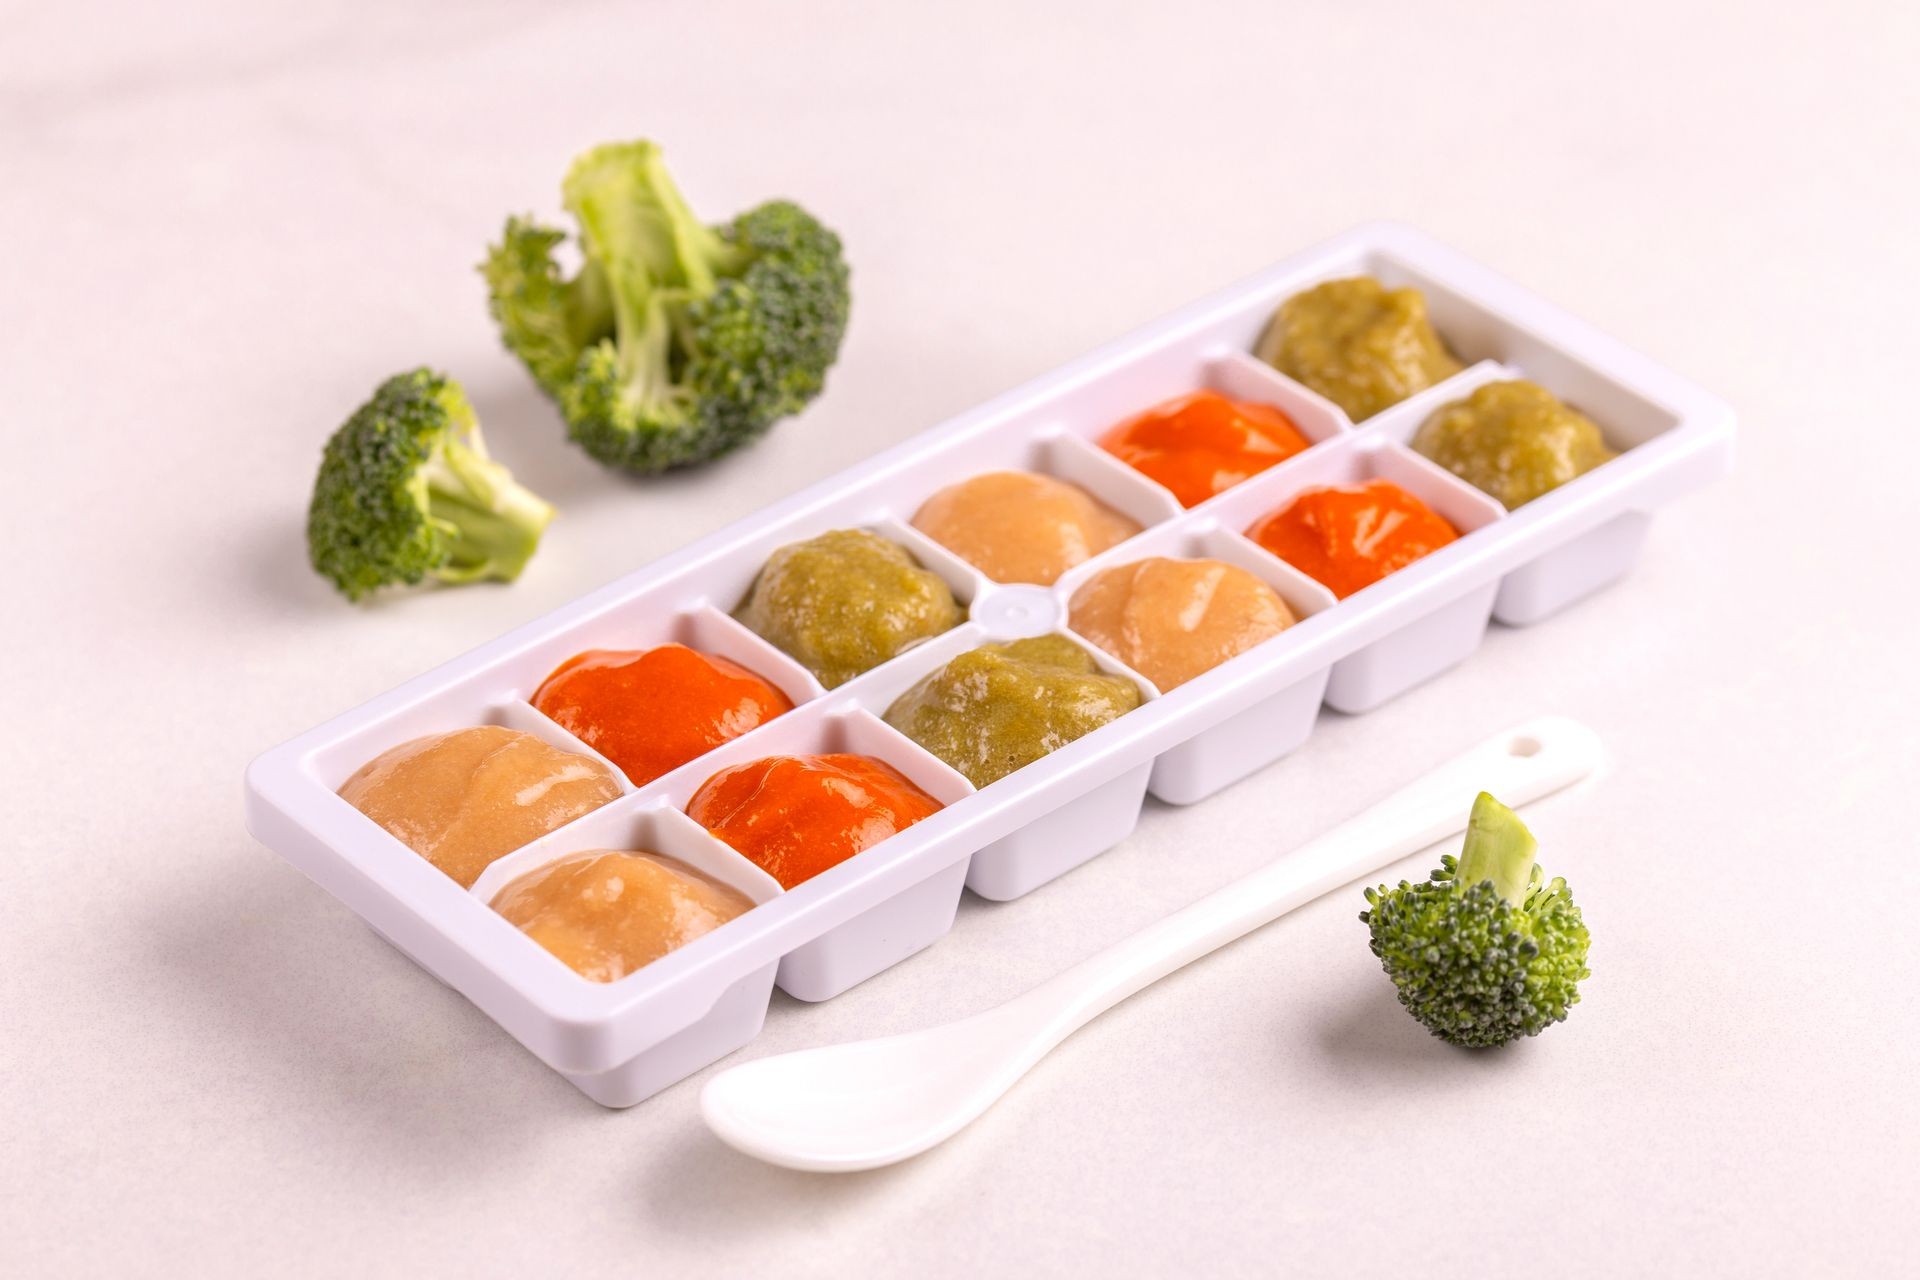 Daycare overnight care food in ice cube trays ready for freezing with ingredients on clean white background. Copy space